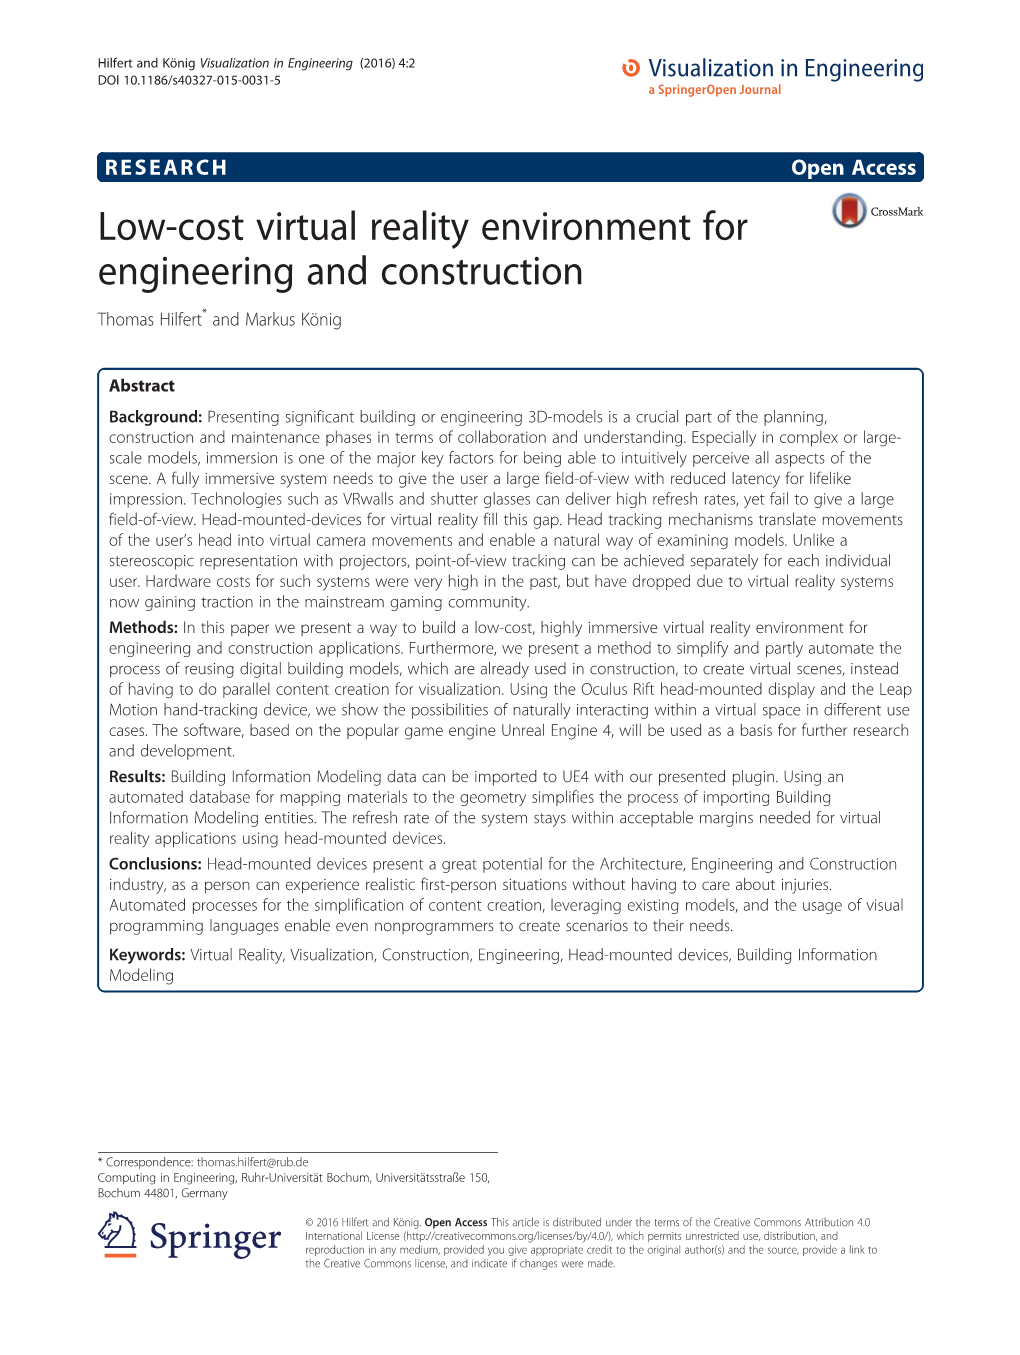 Low-Cost Virtual Reality Environment for Engineering and Construction Thomas Hilfert* and Markus König